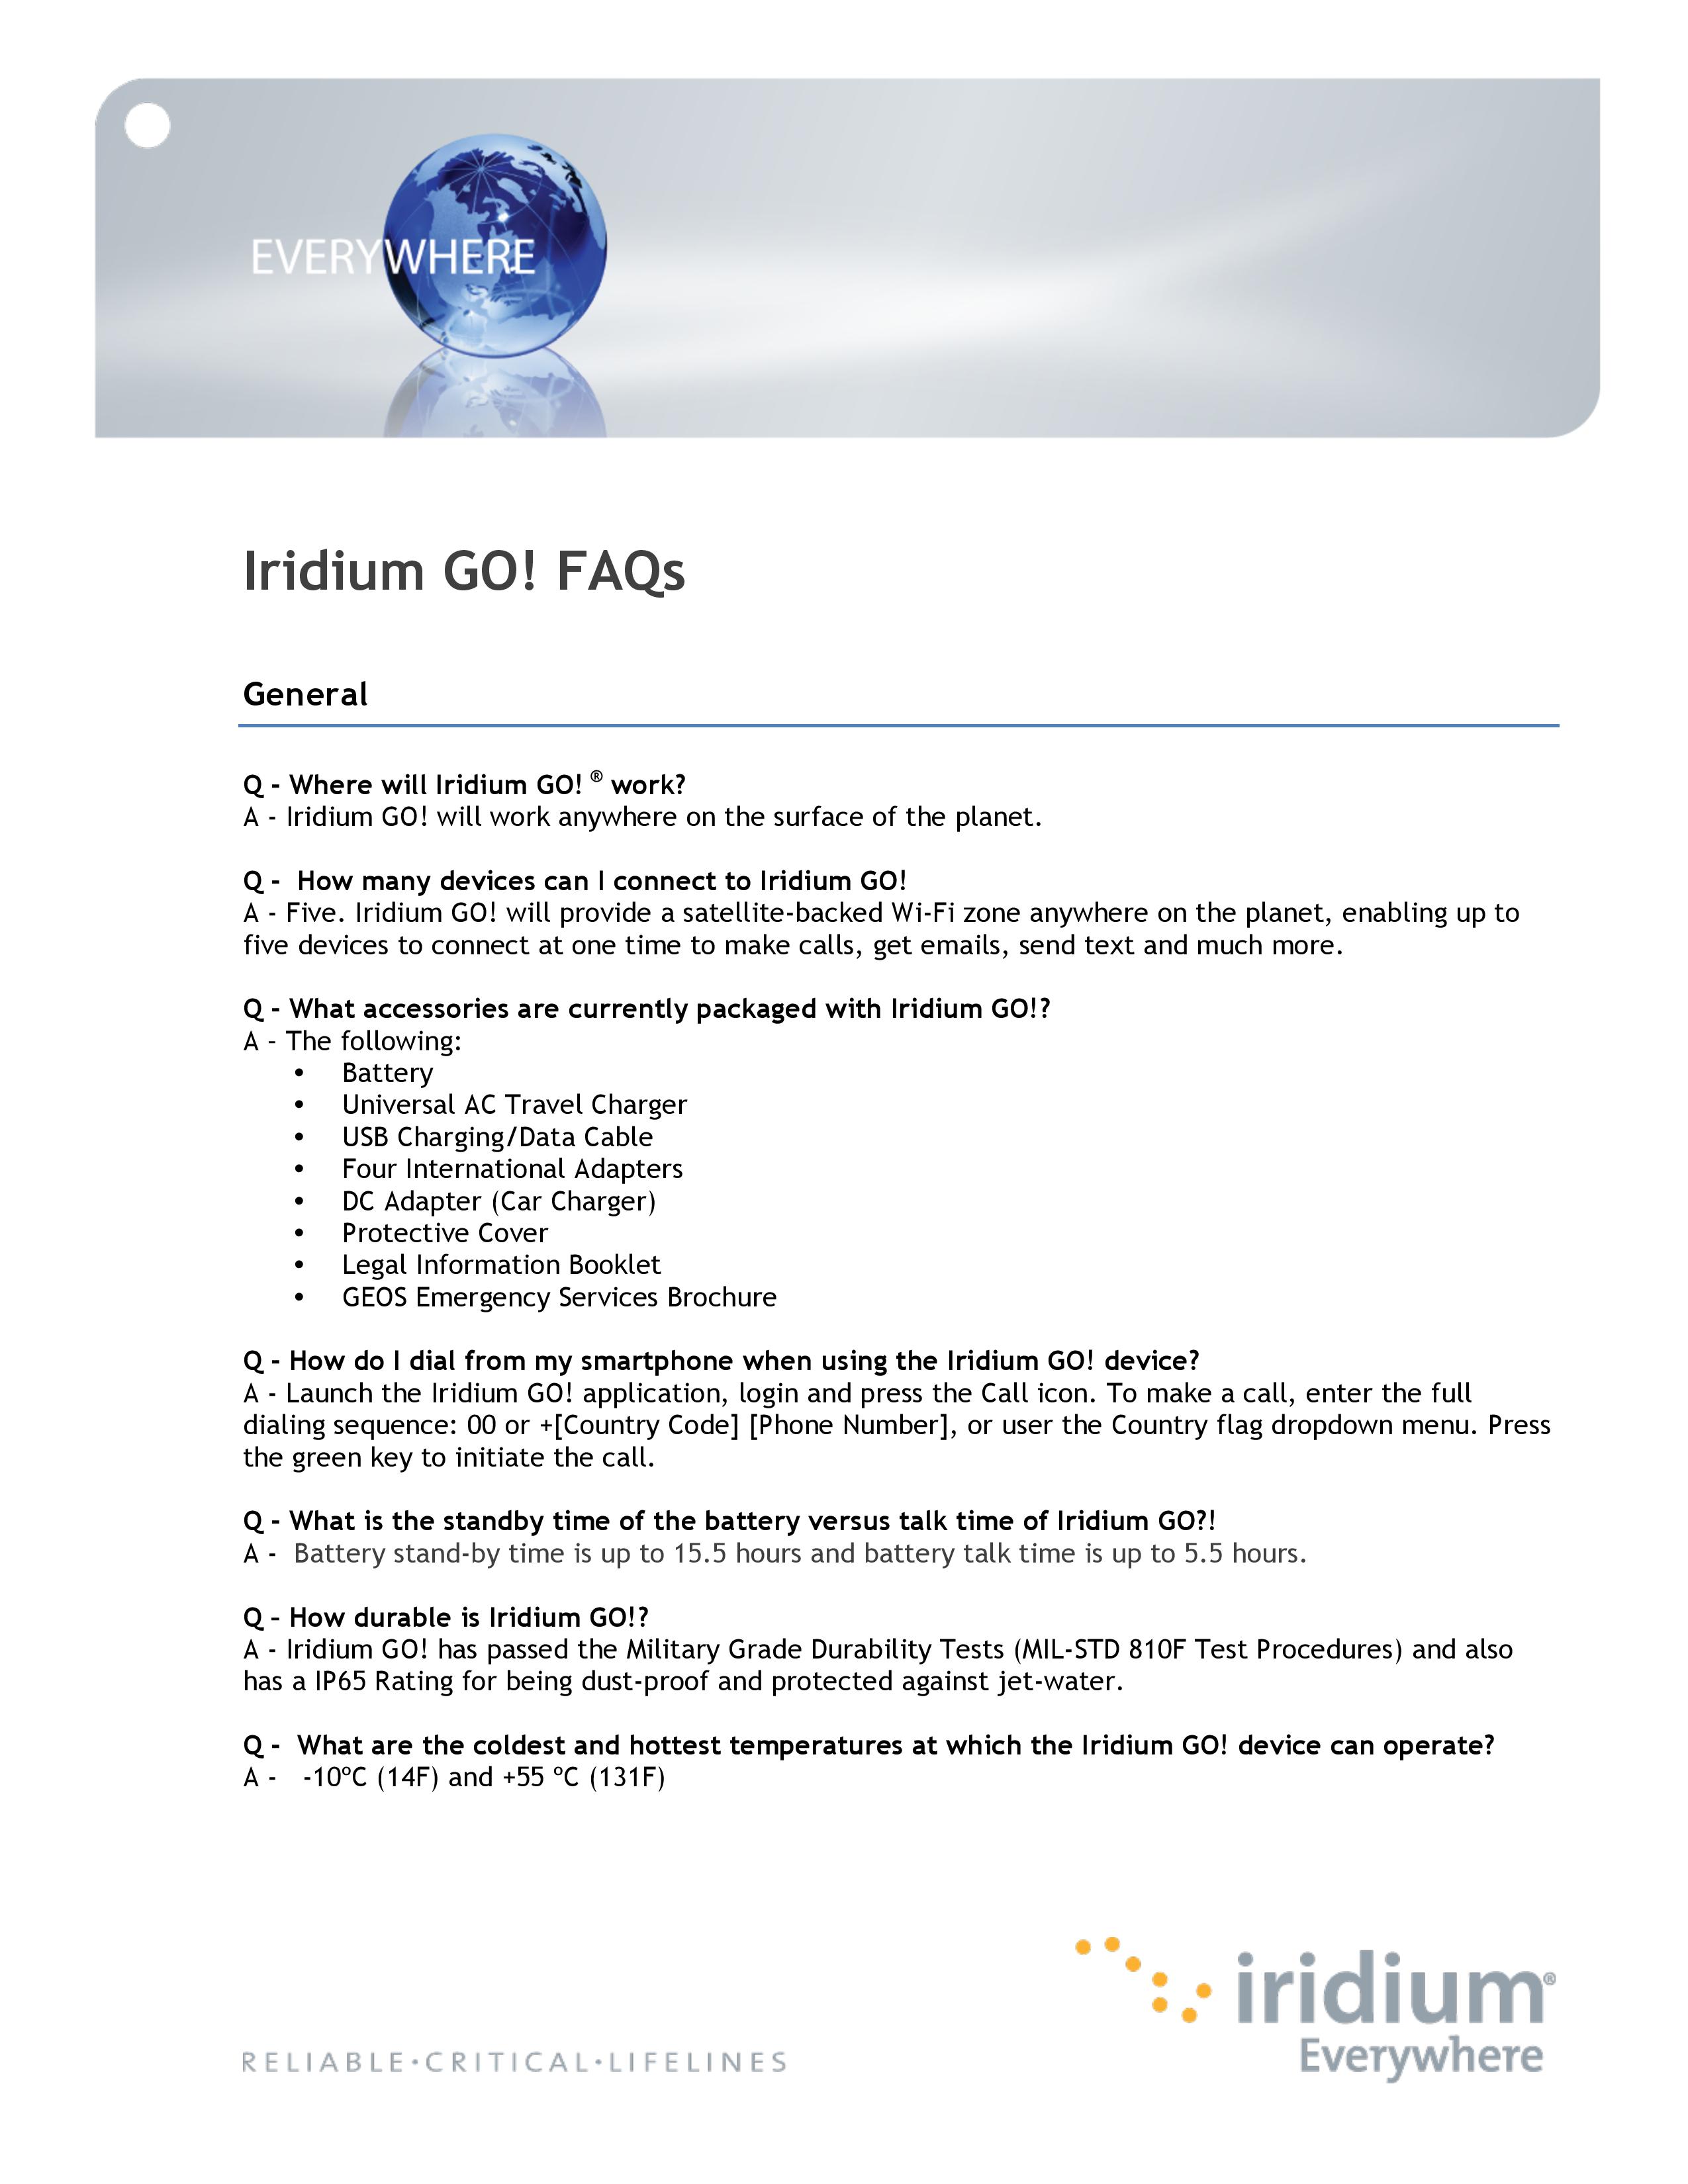 FAQ_Iridium_GO__Frequently_Asked_Questions_DEC17_1___1_-page-001.jpg